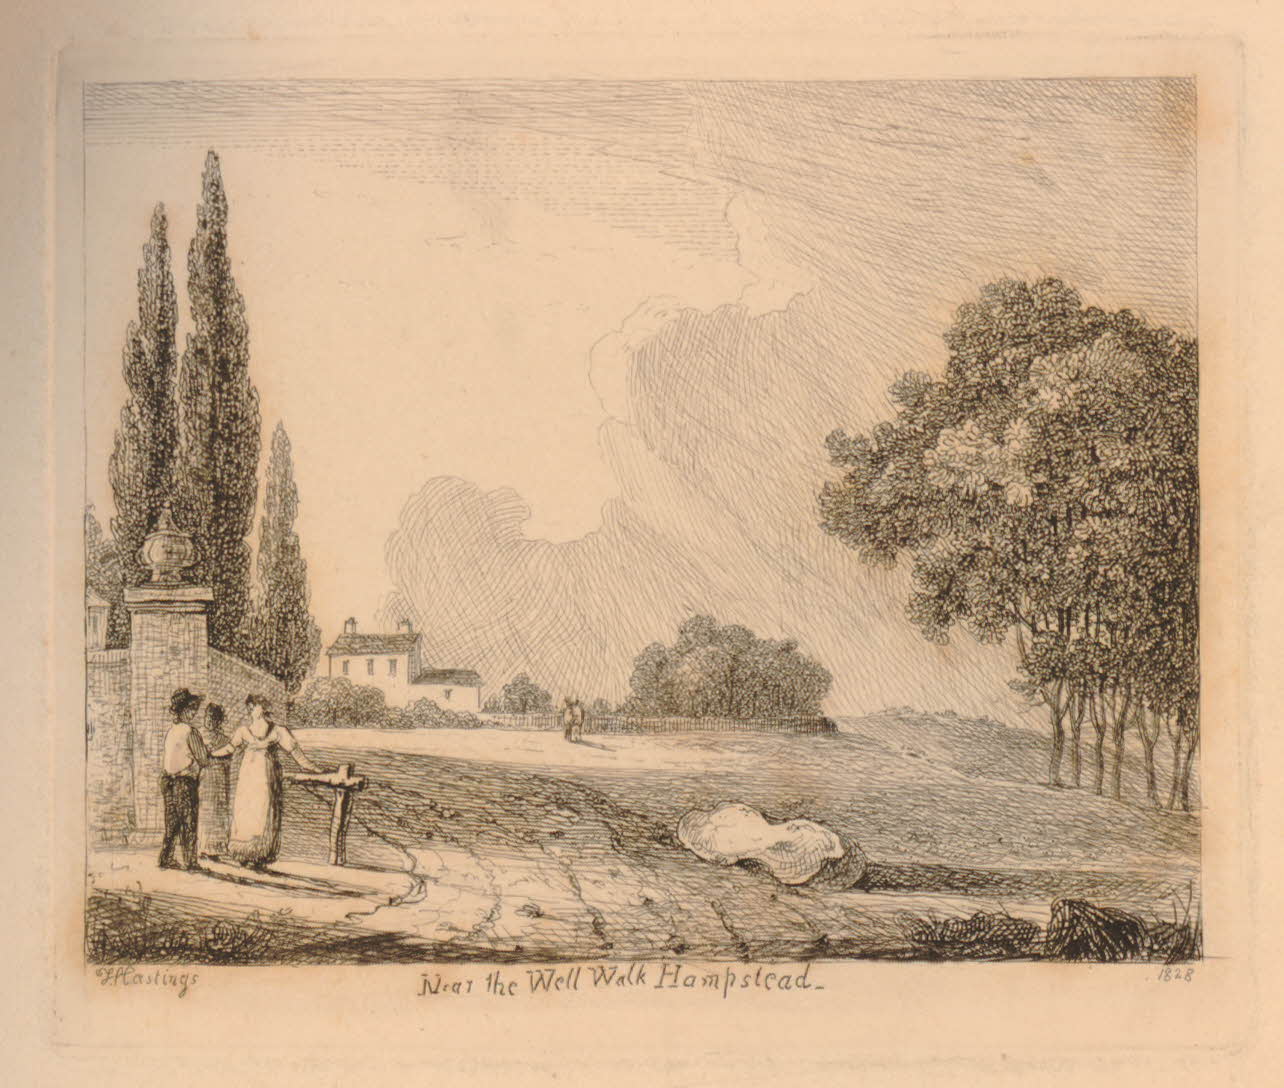 Near the Well Walk Hampstead,1828, by Thomas Hasting (British
        Museum)